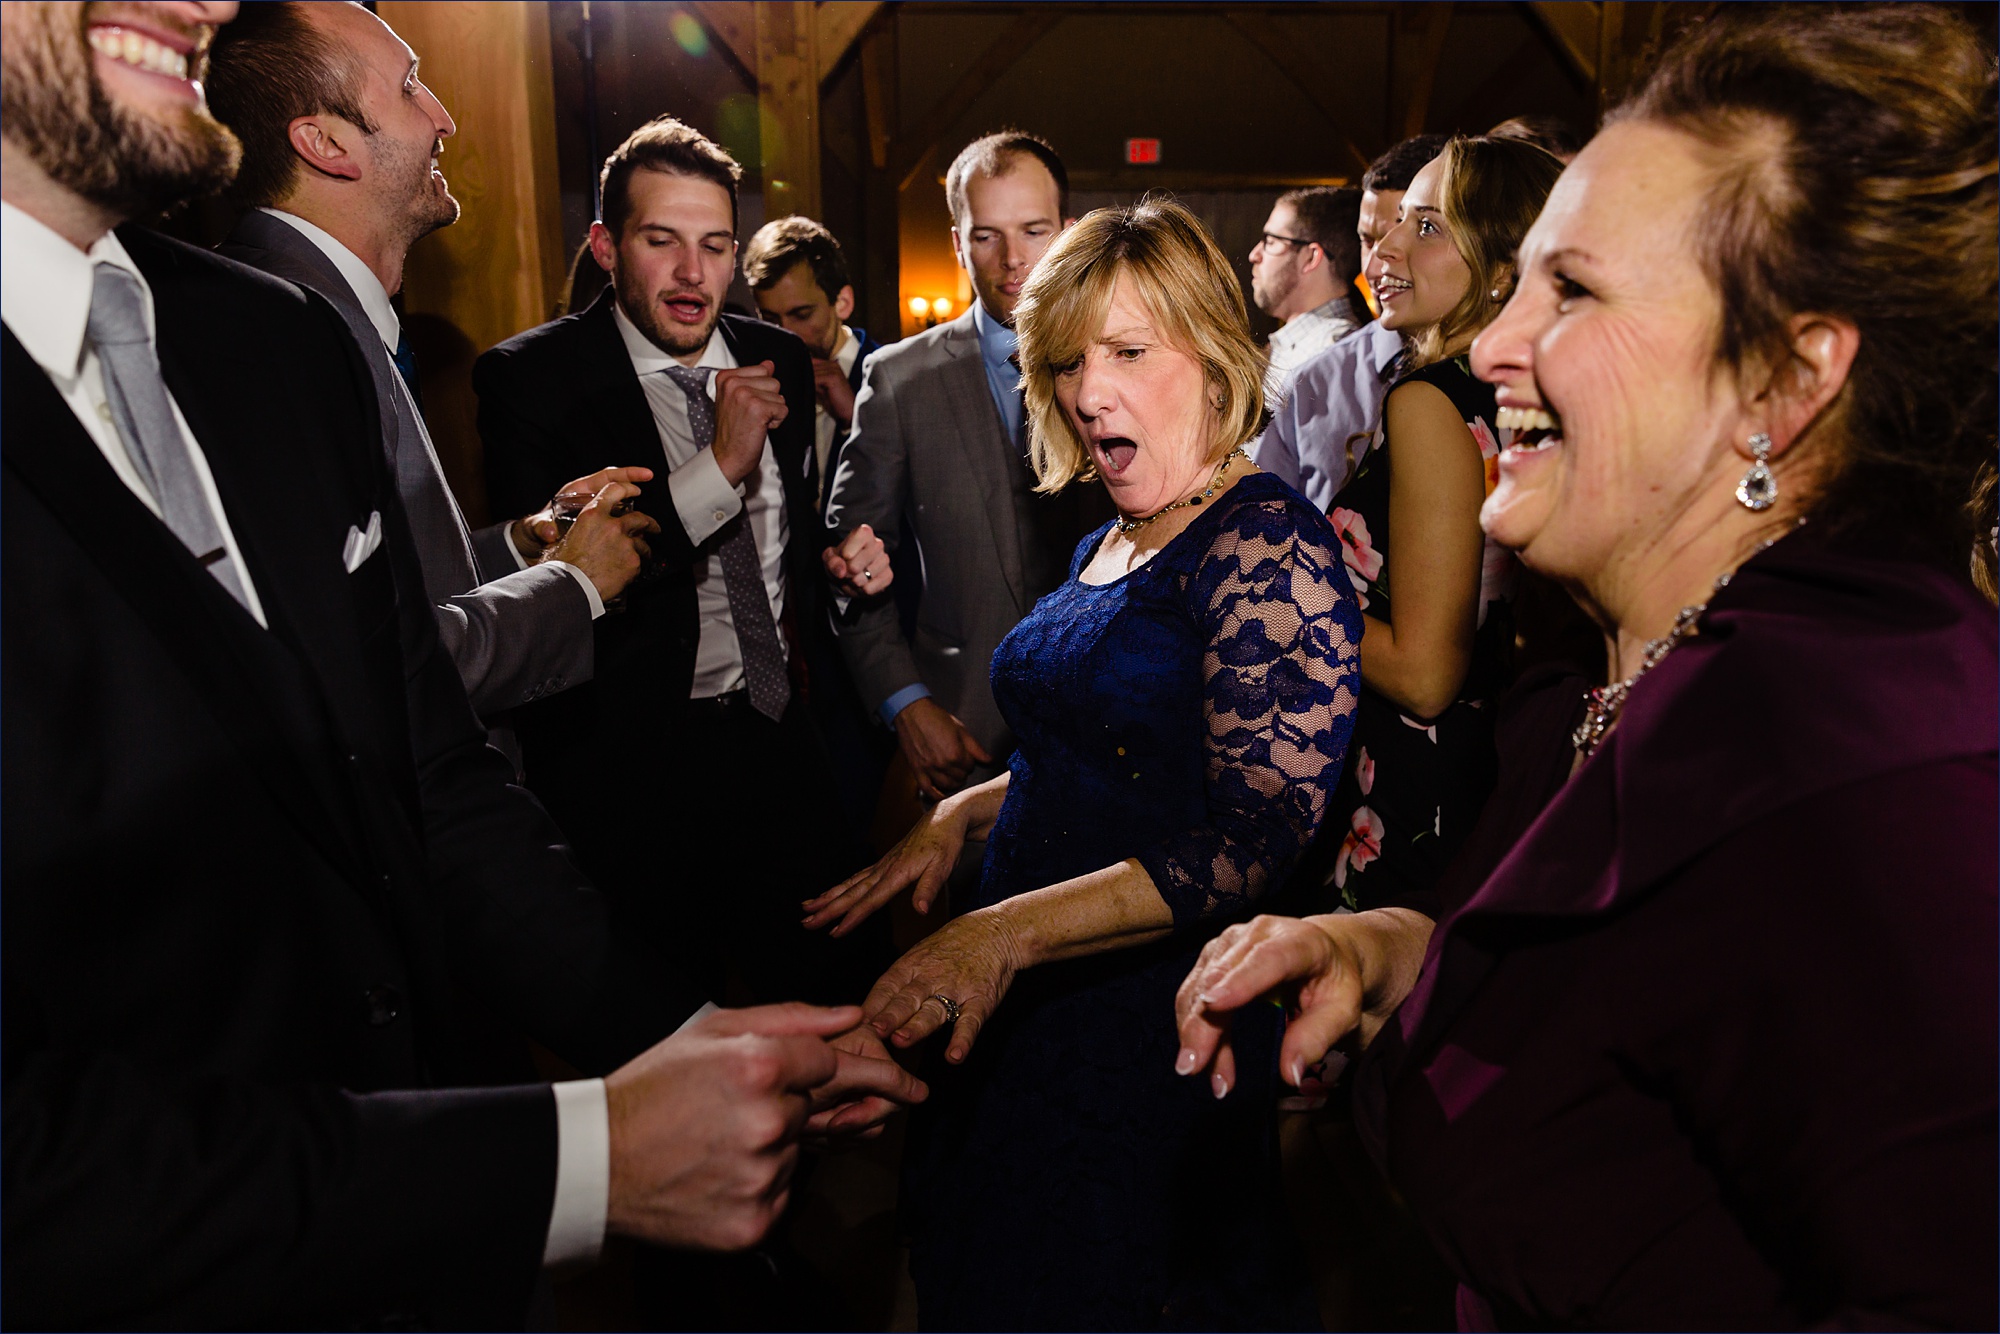 The dance floor begins to heat up with guests in Maine